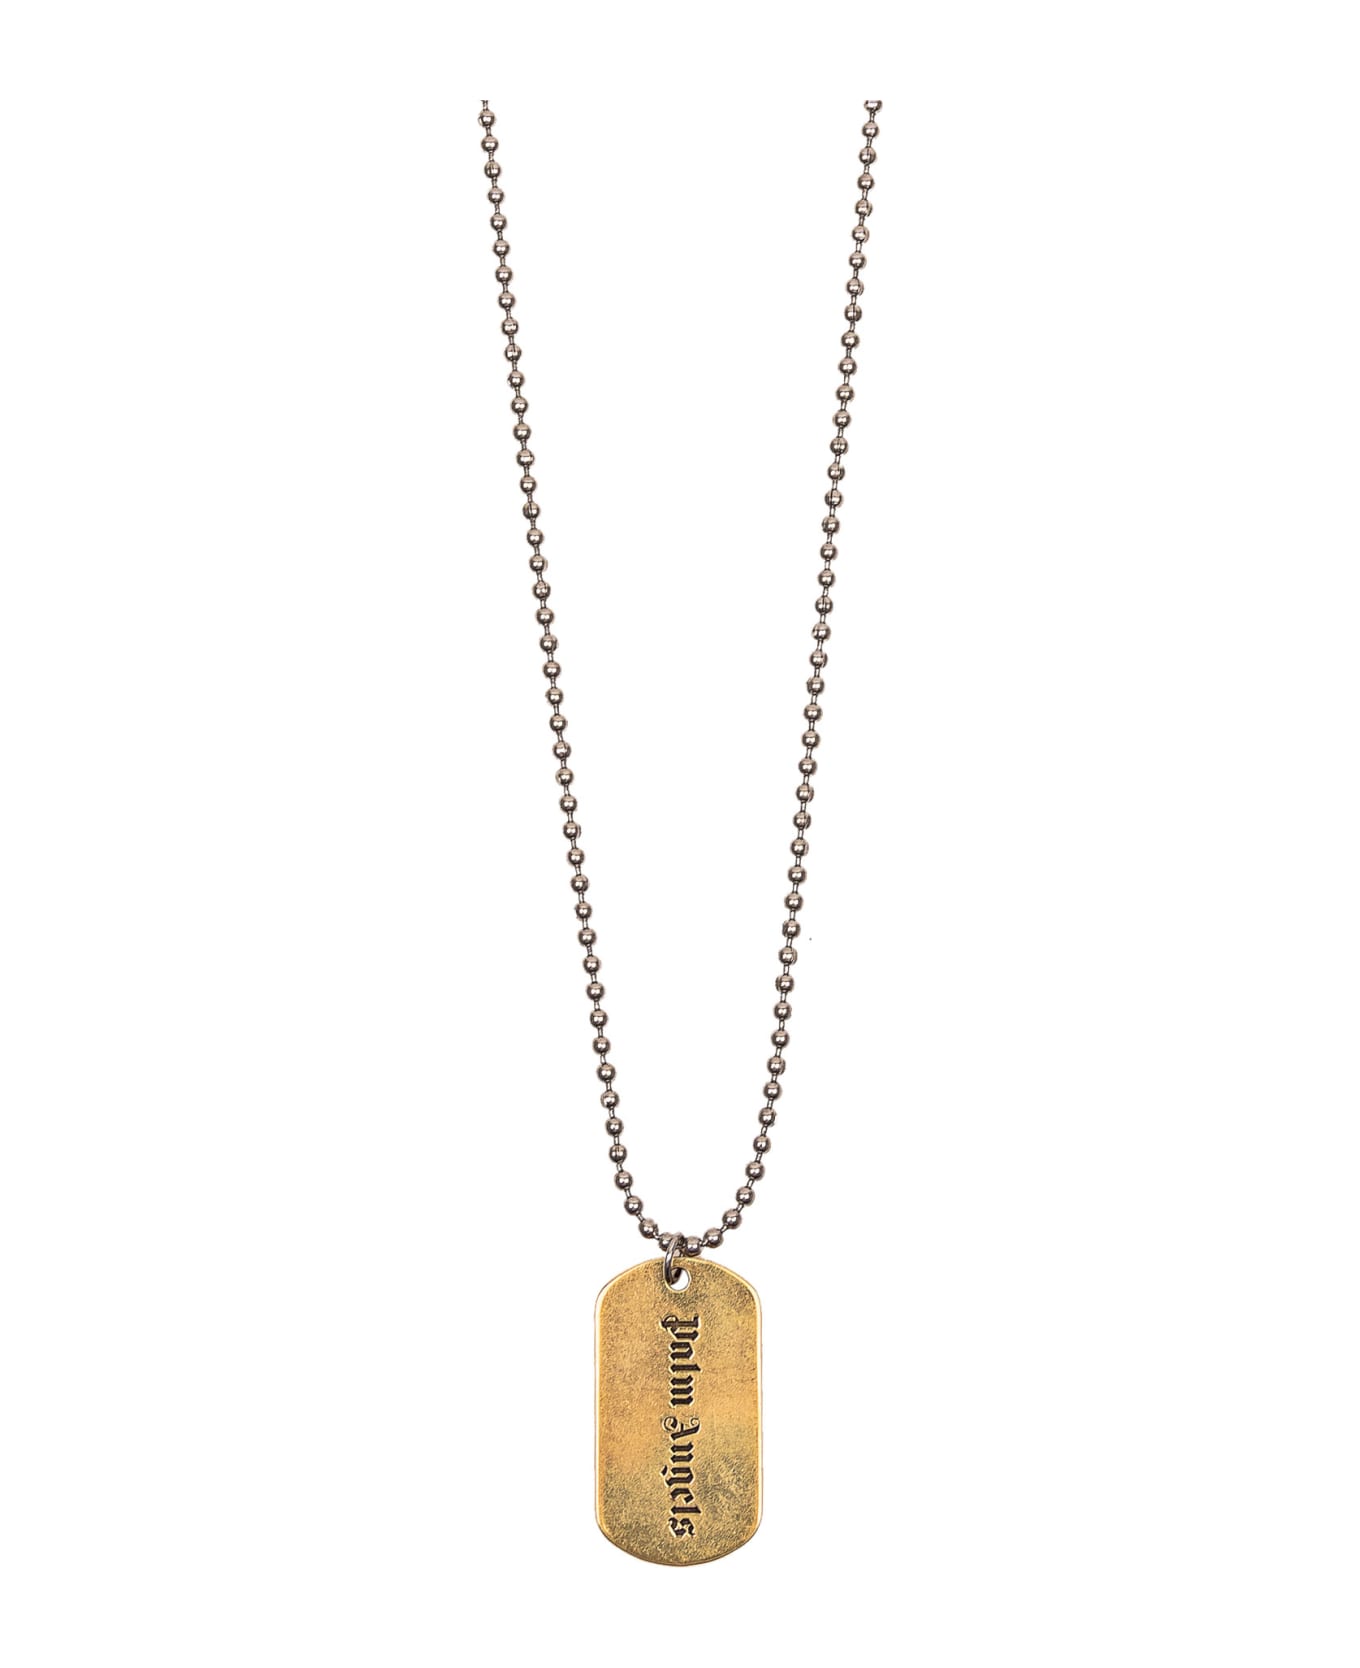 Palm Angels Necklace With Military Plate - GOLD-BLACK ネックレス